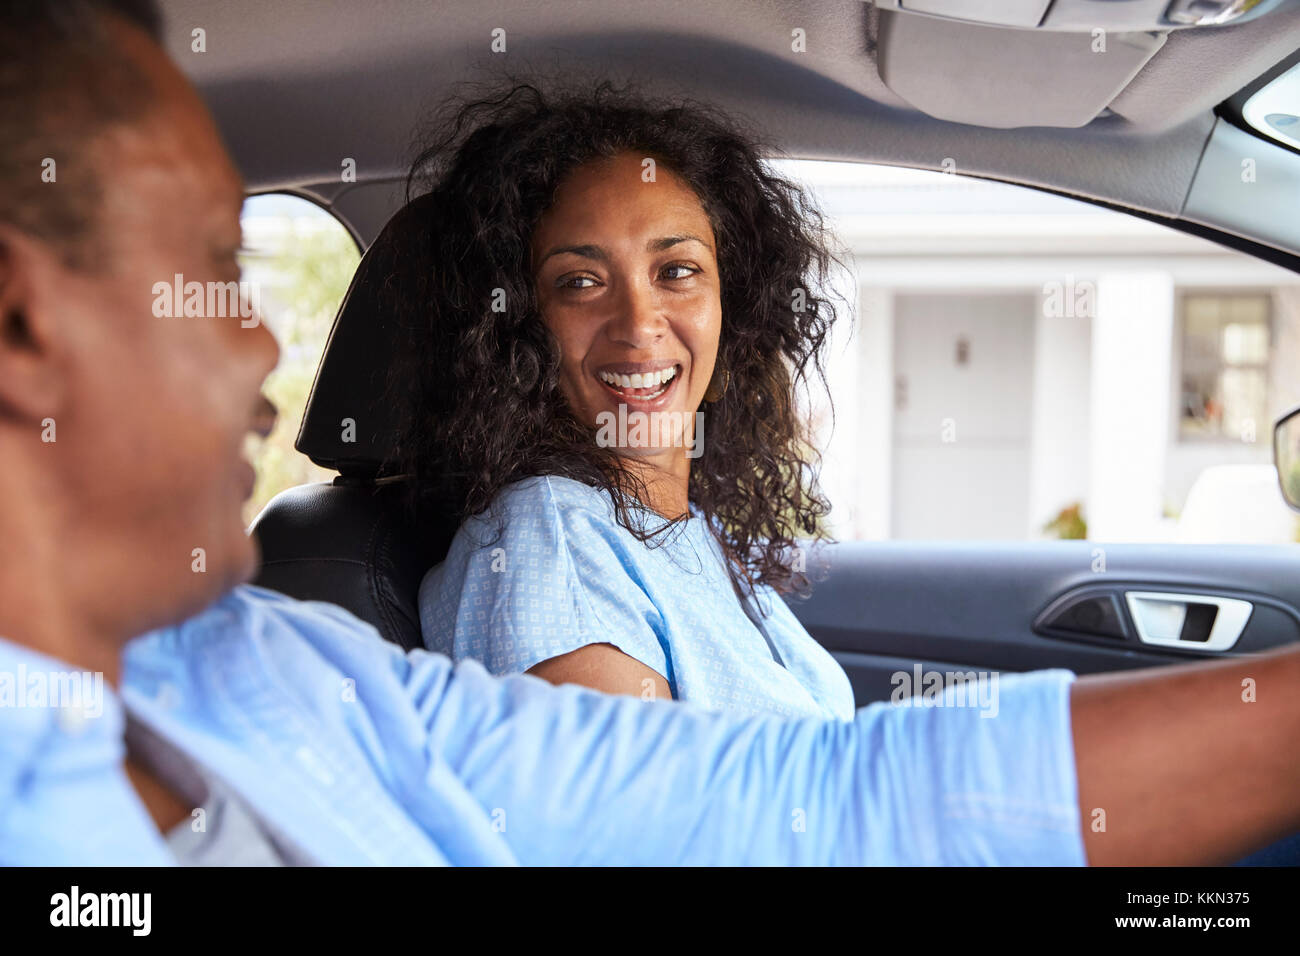 Mature Couple Sitting In Car On Road Trip Stock Photo